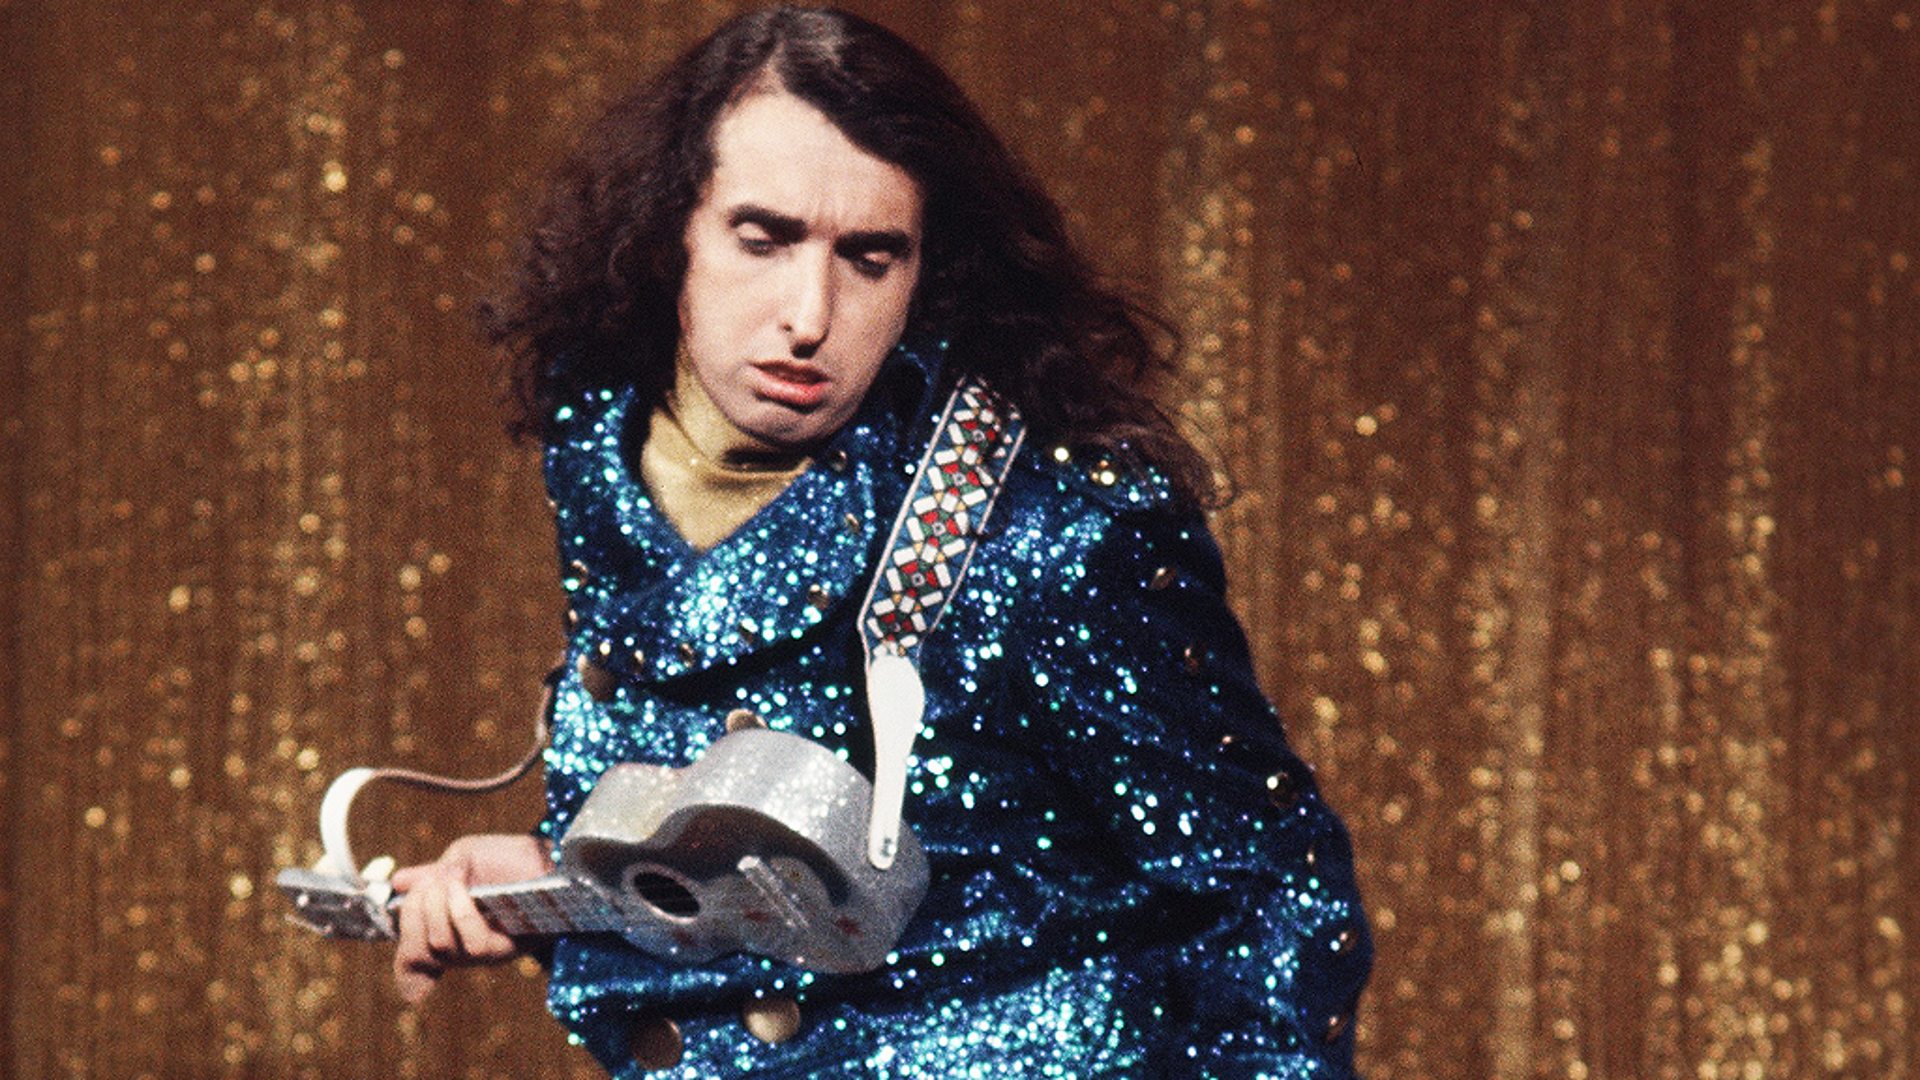 BBC Arts BBC Arts - How Tiny Tim blew my mind: The story of obsession